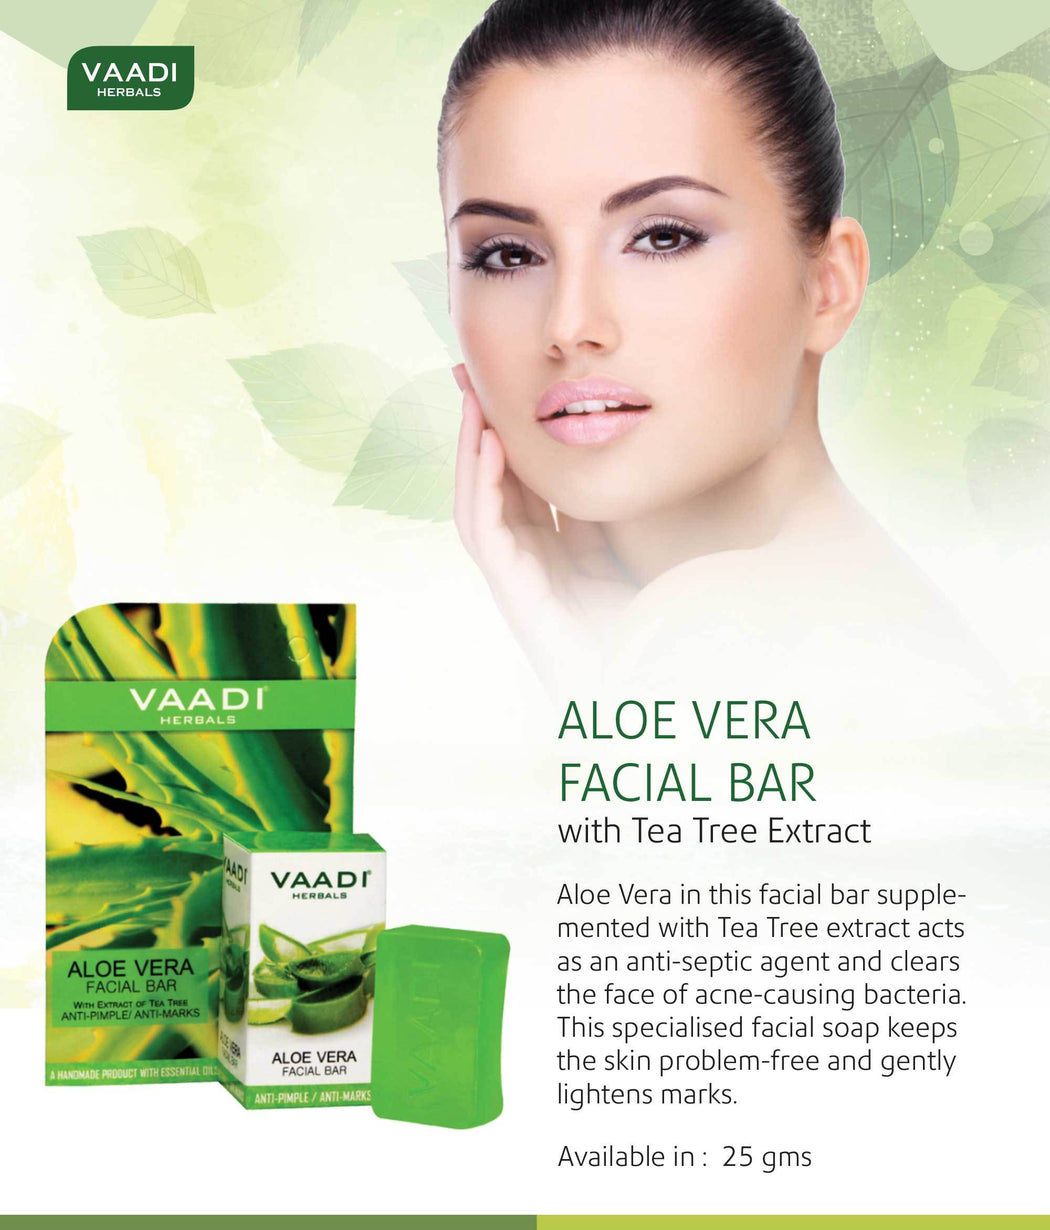 Organic Aloe Vera Facial Bar with Tea Tree and Honey - Reduces Acne - Keeps Skin Infection Free (25 gms/0.9 oz)